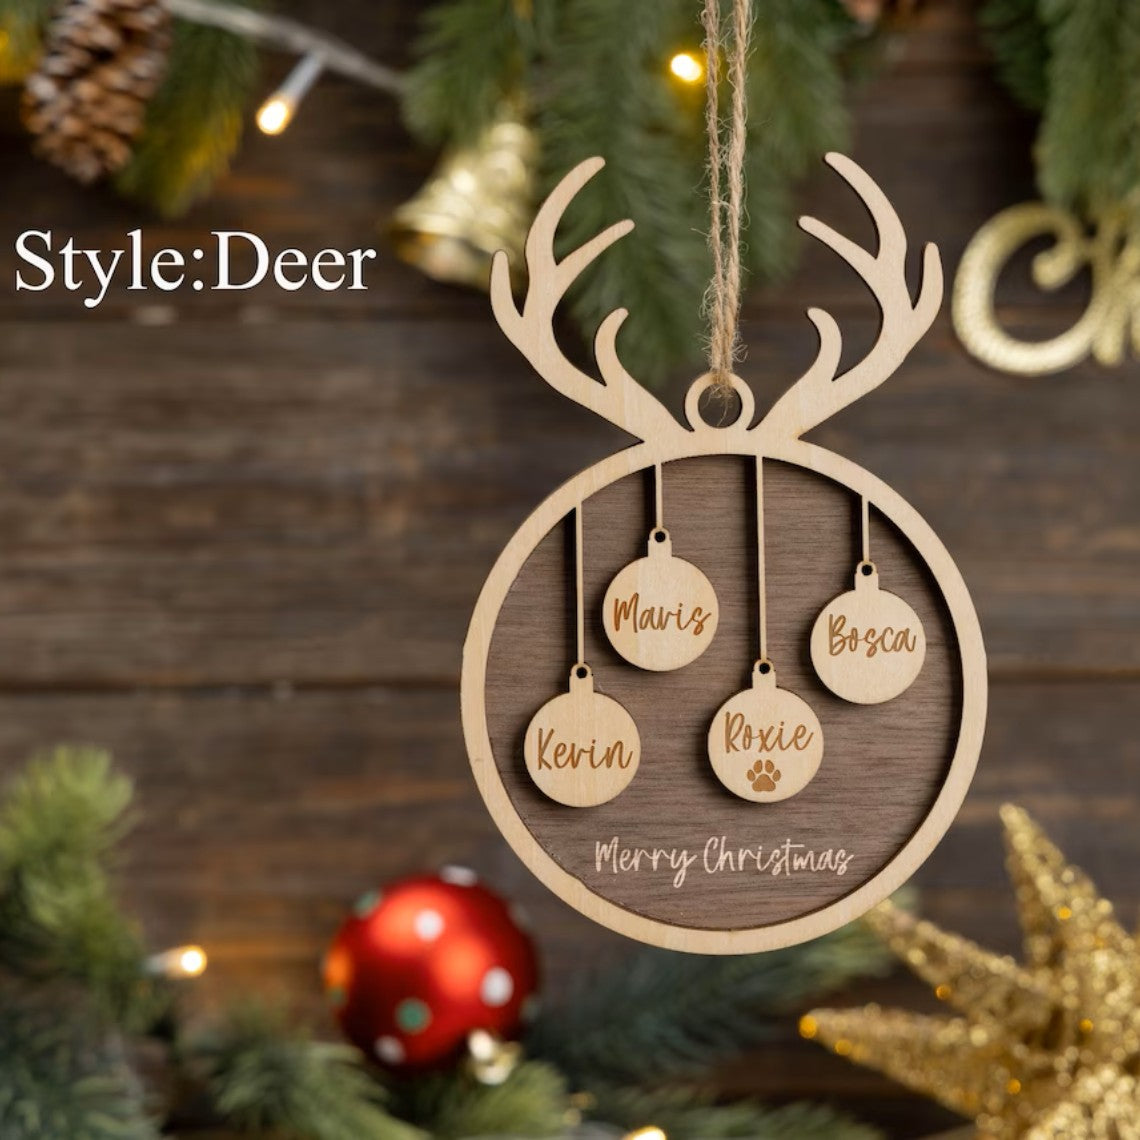 Customize with your name on wooden Christmas decorations, add warmth to your holiday